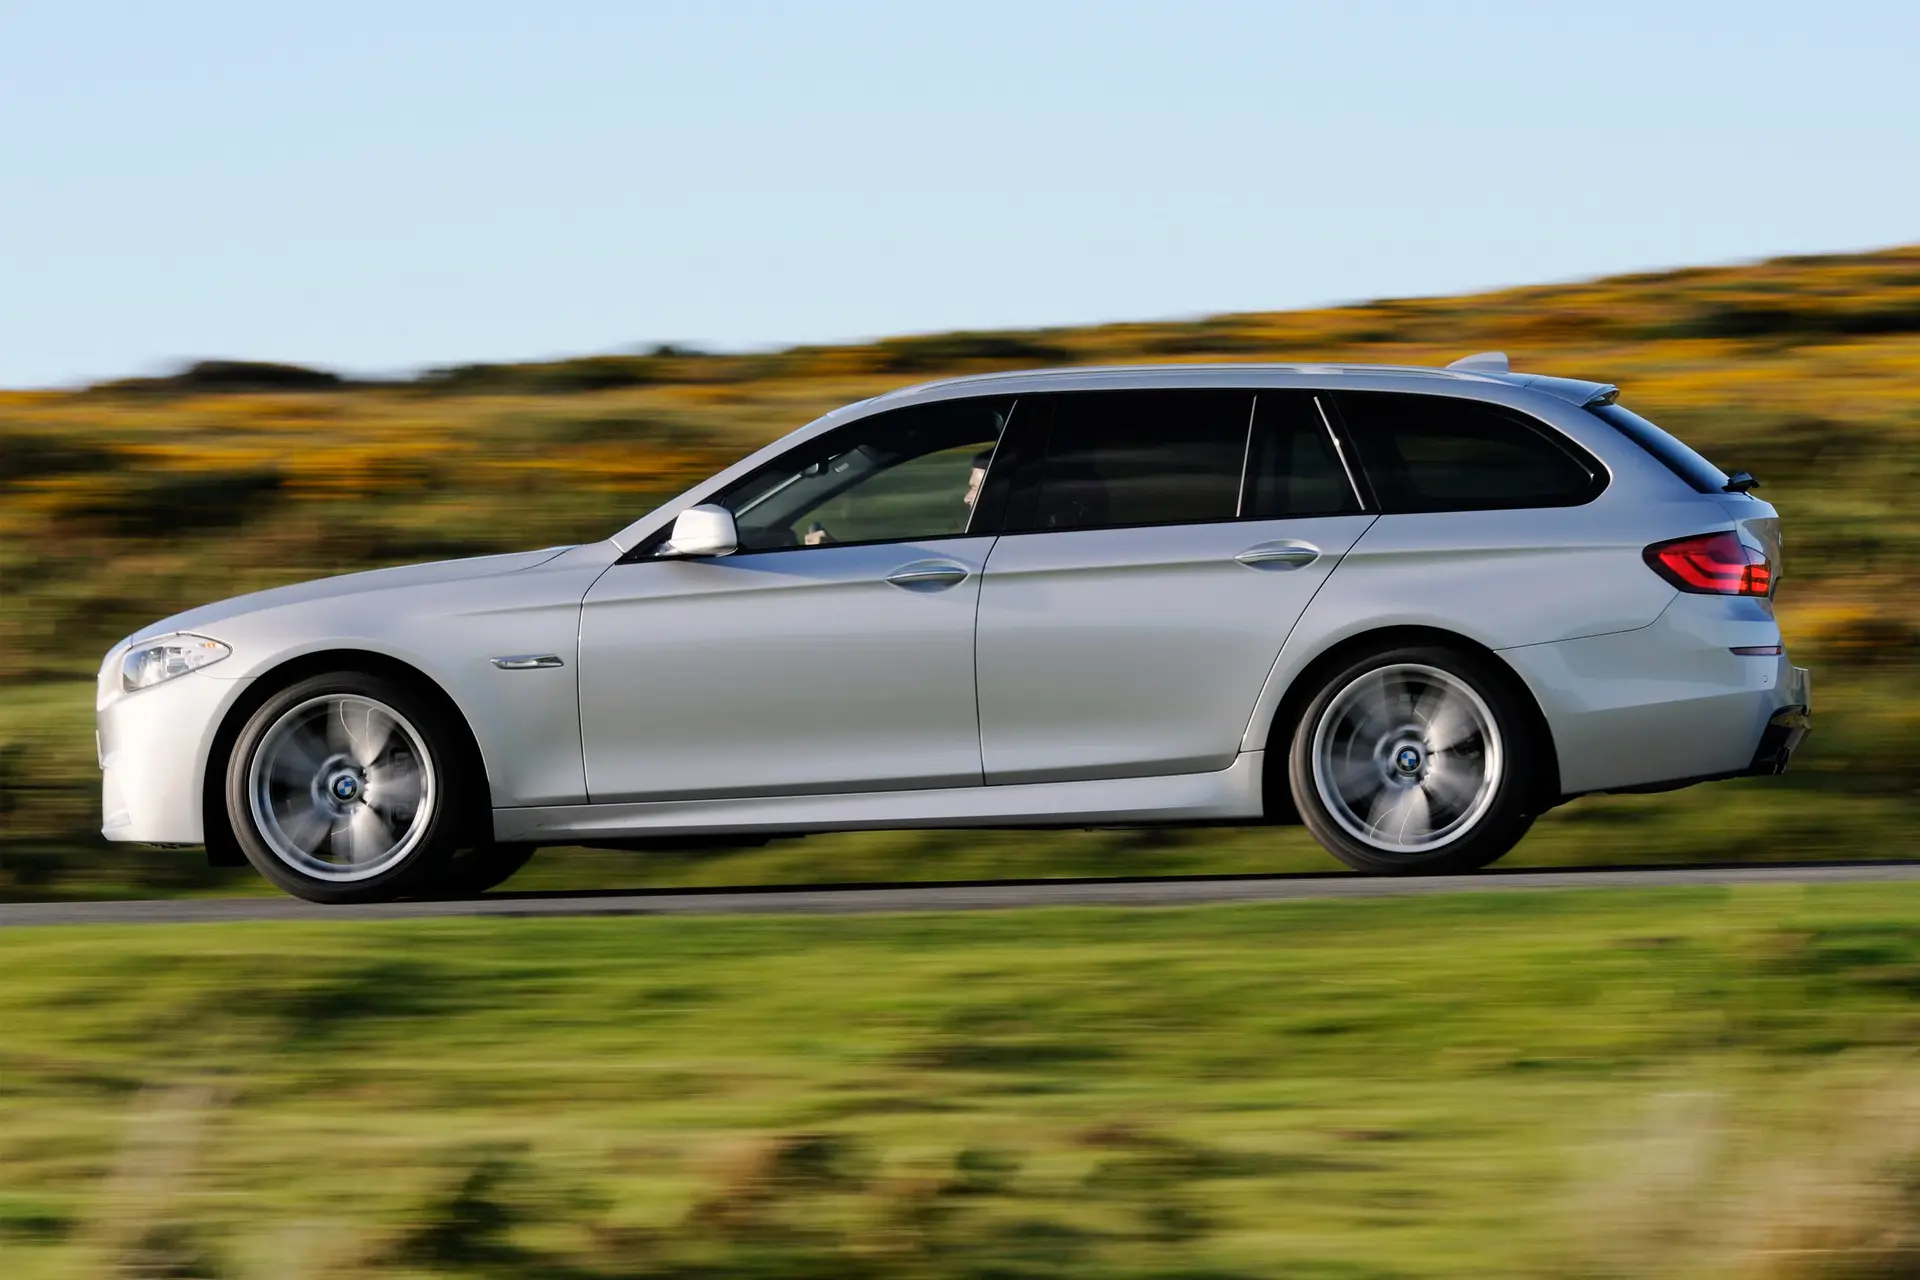 BMW 5 Series Touring (2010-2017) Review: Exterior side photo of the BMW 5 Series Touring on the road